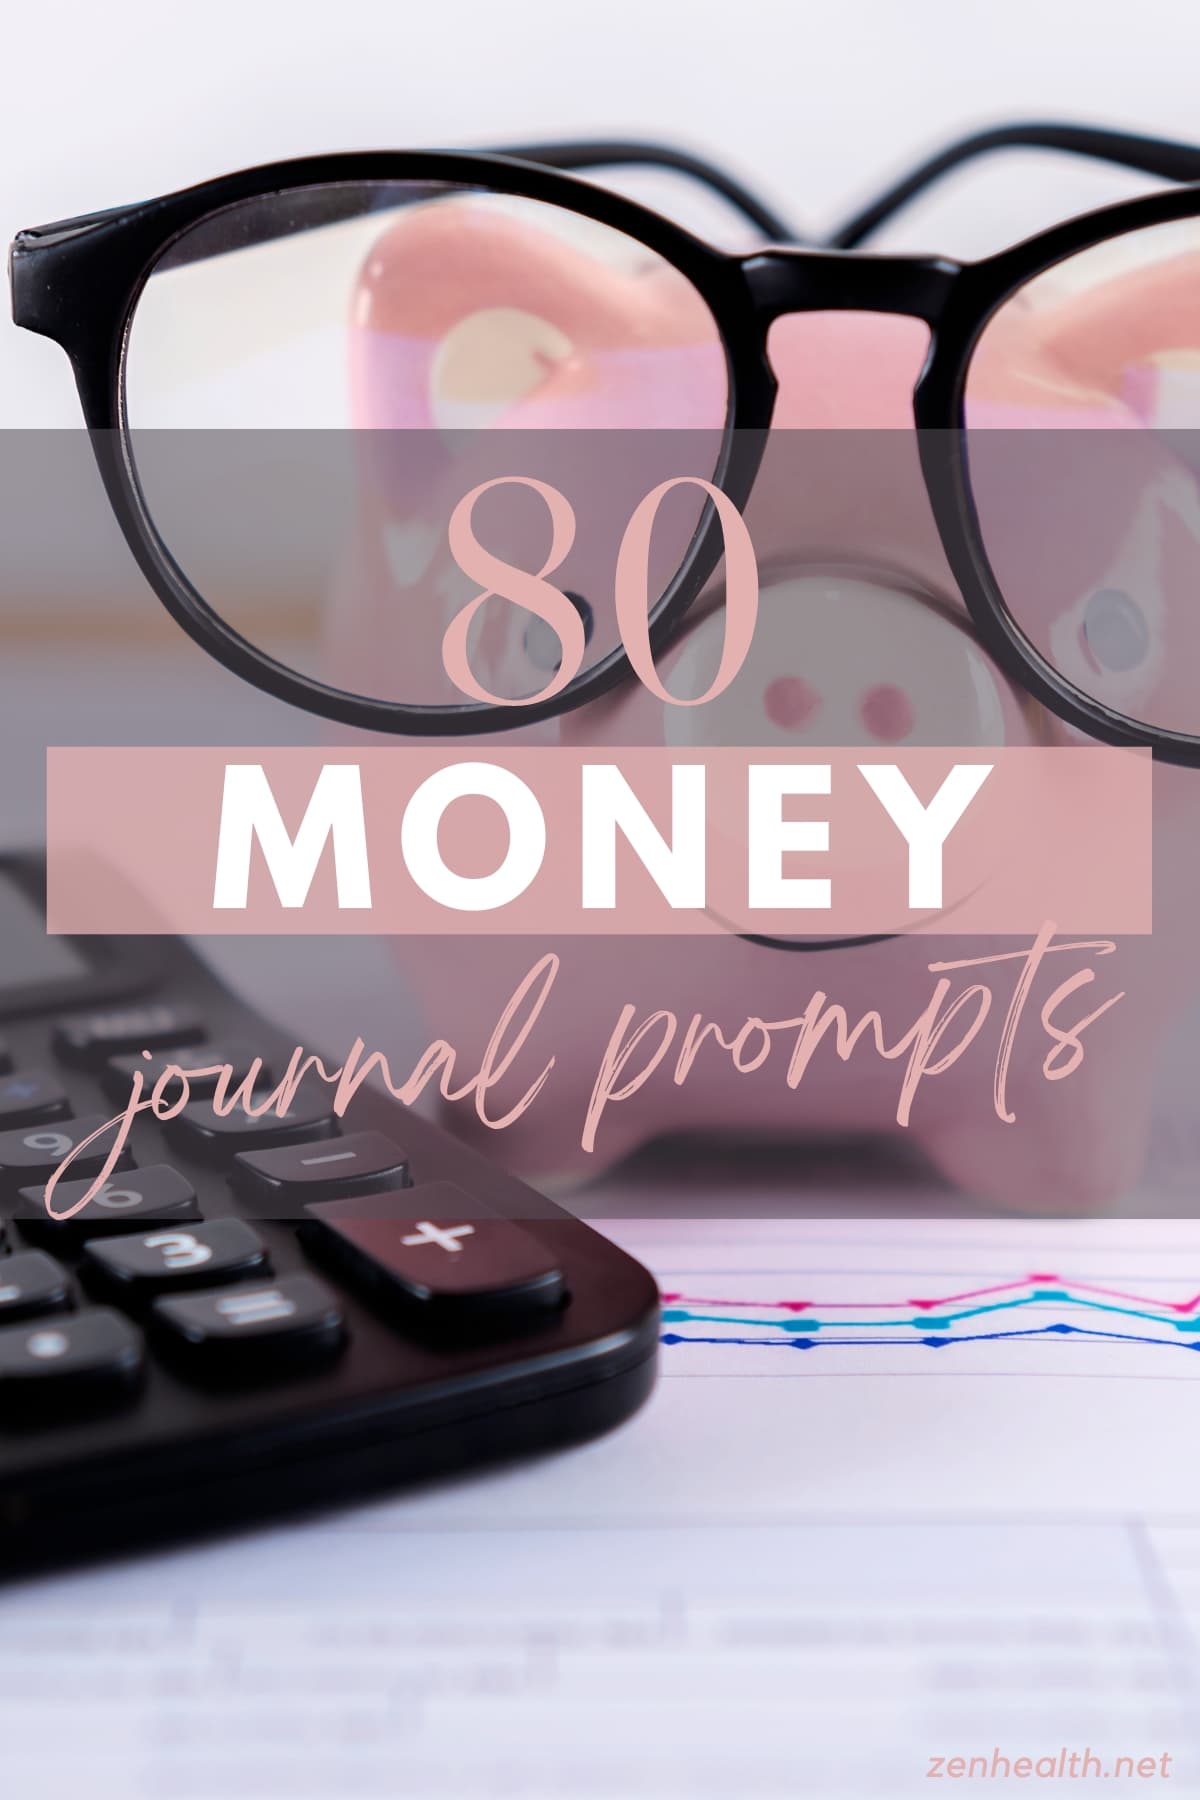 80 money journal prompts text overlay on a photo of a pink piggybank with black spectacles, calculator, and graph